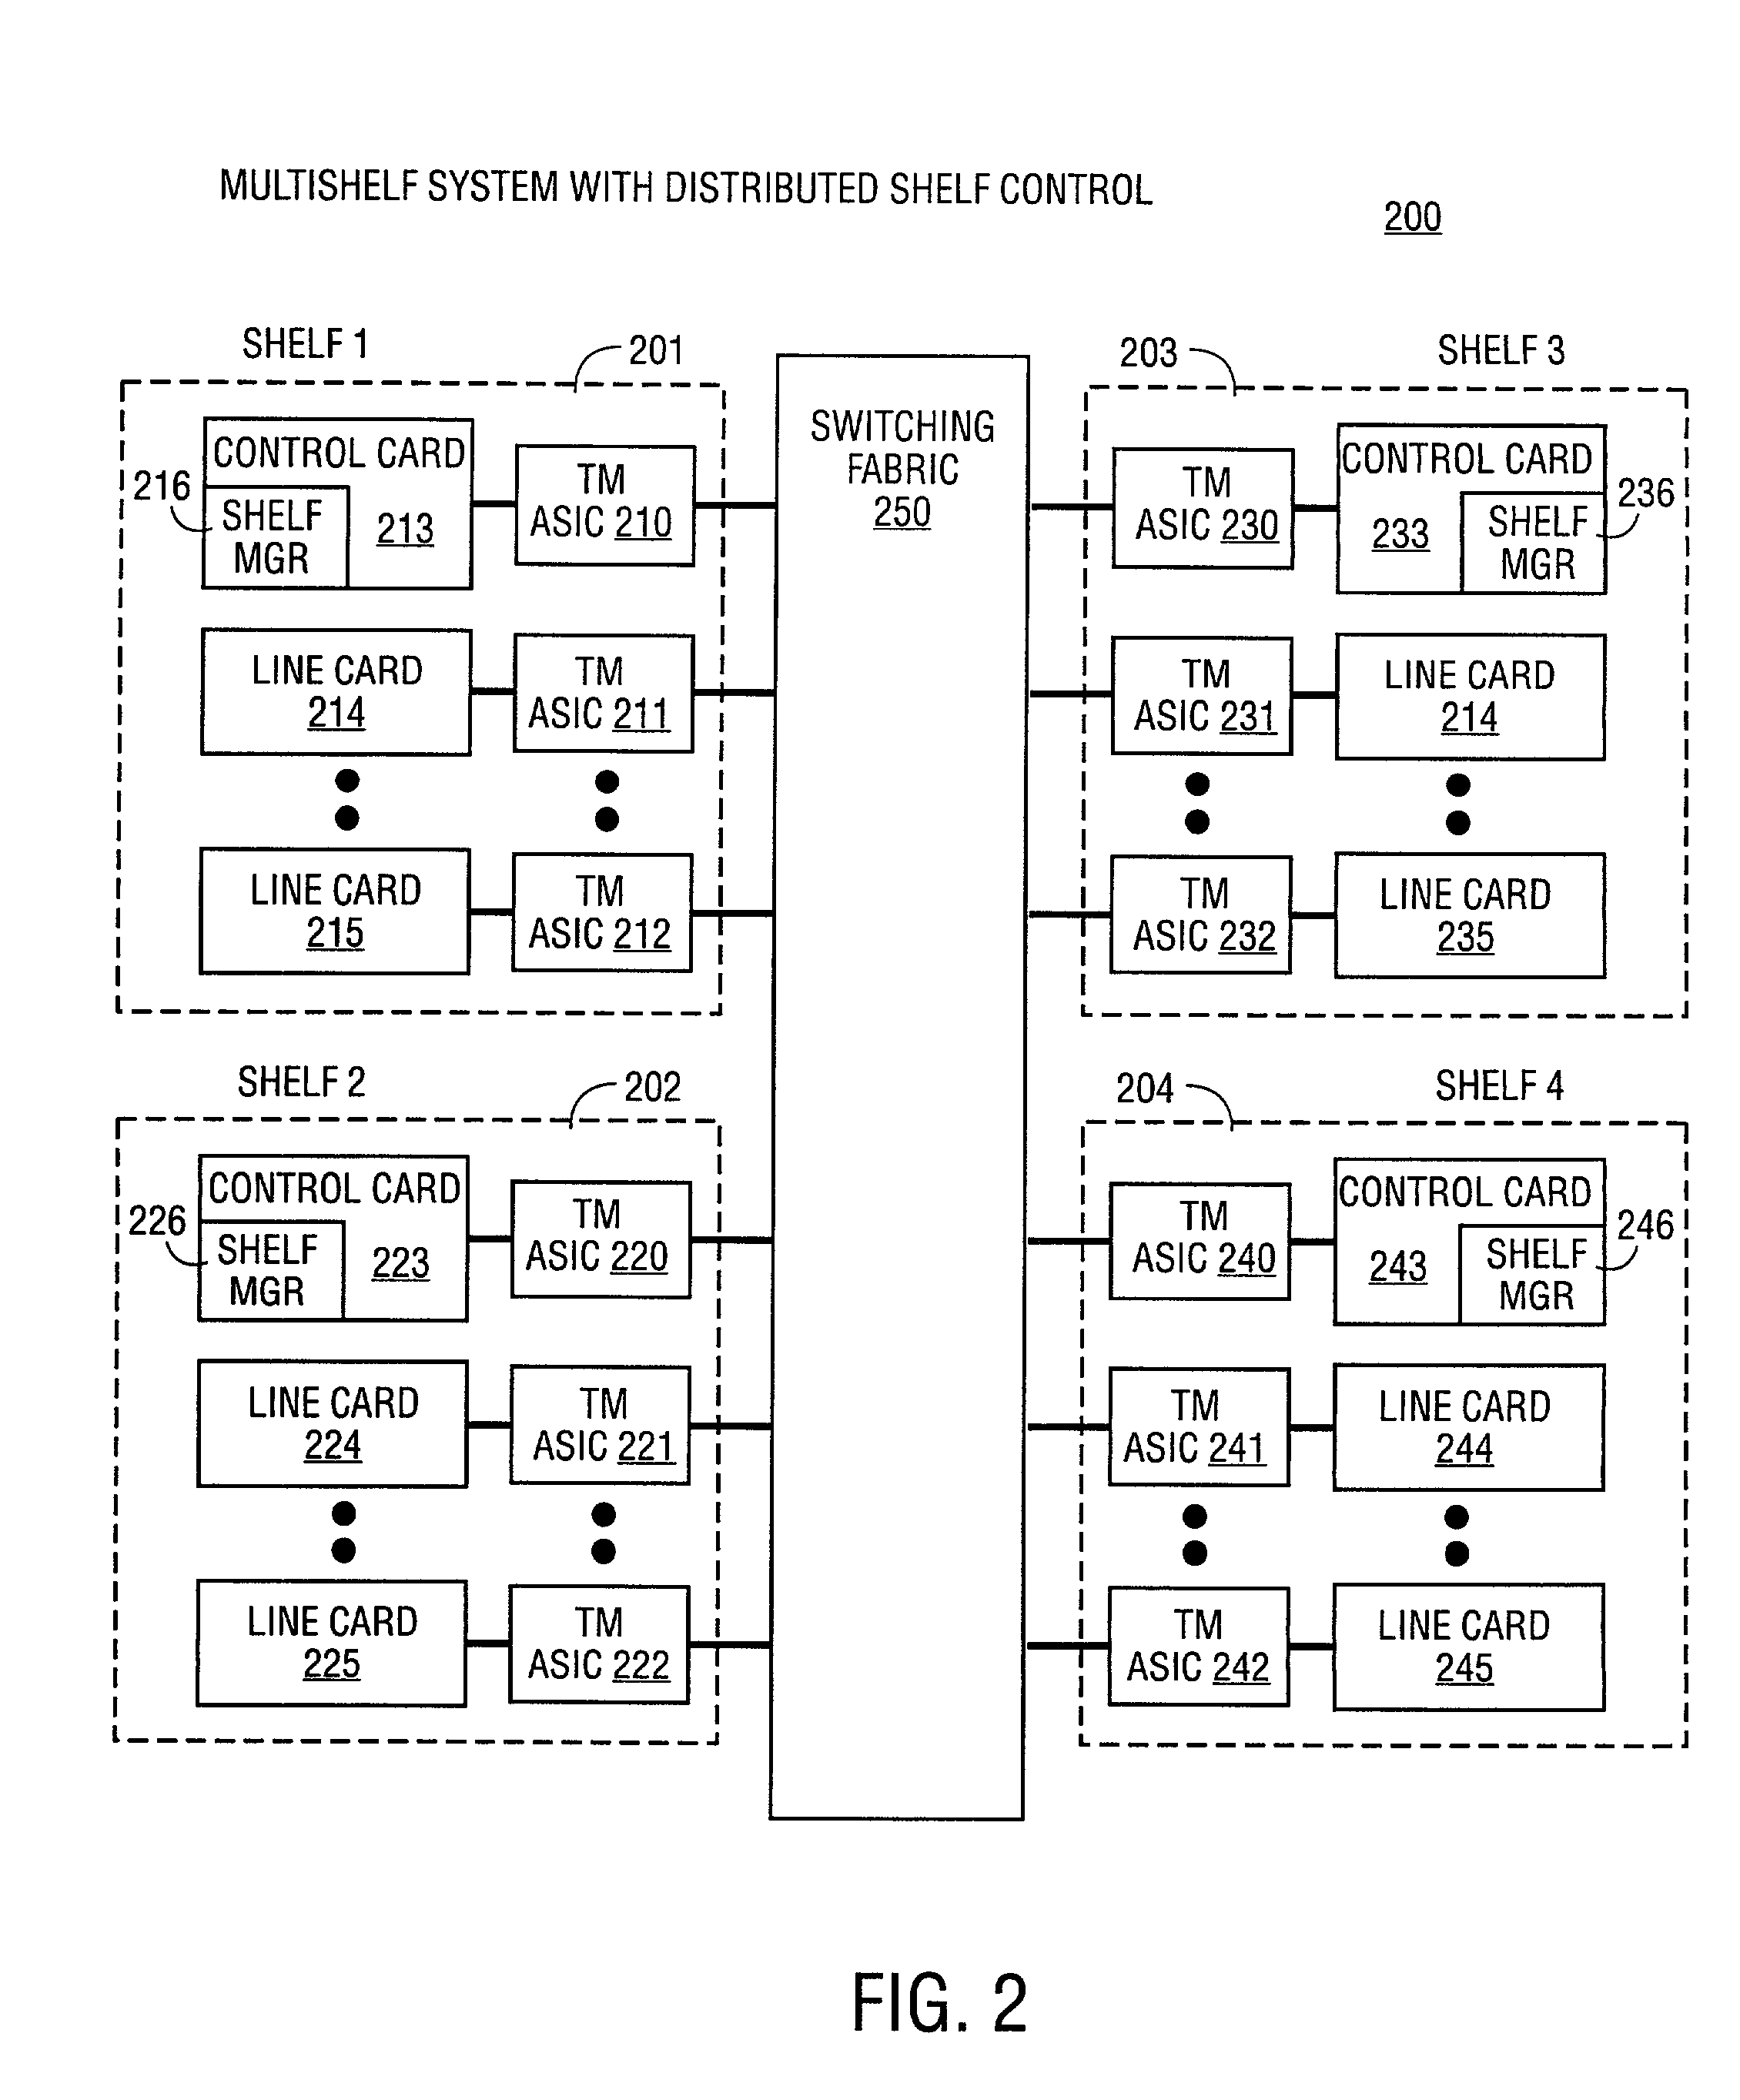 Switching fabric port mapping in large scale redundant switches